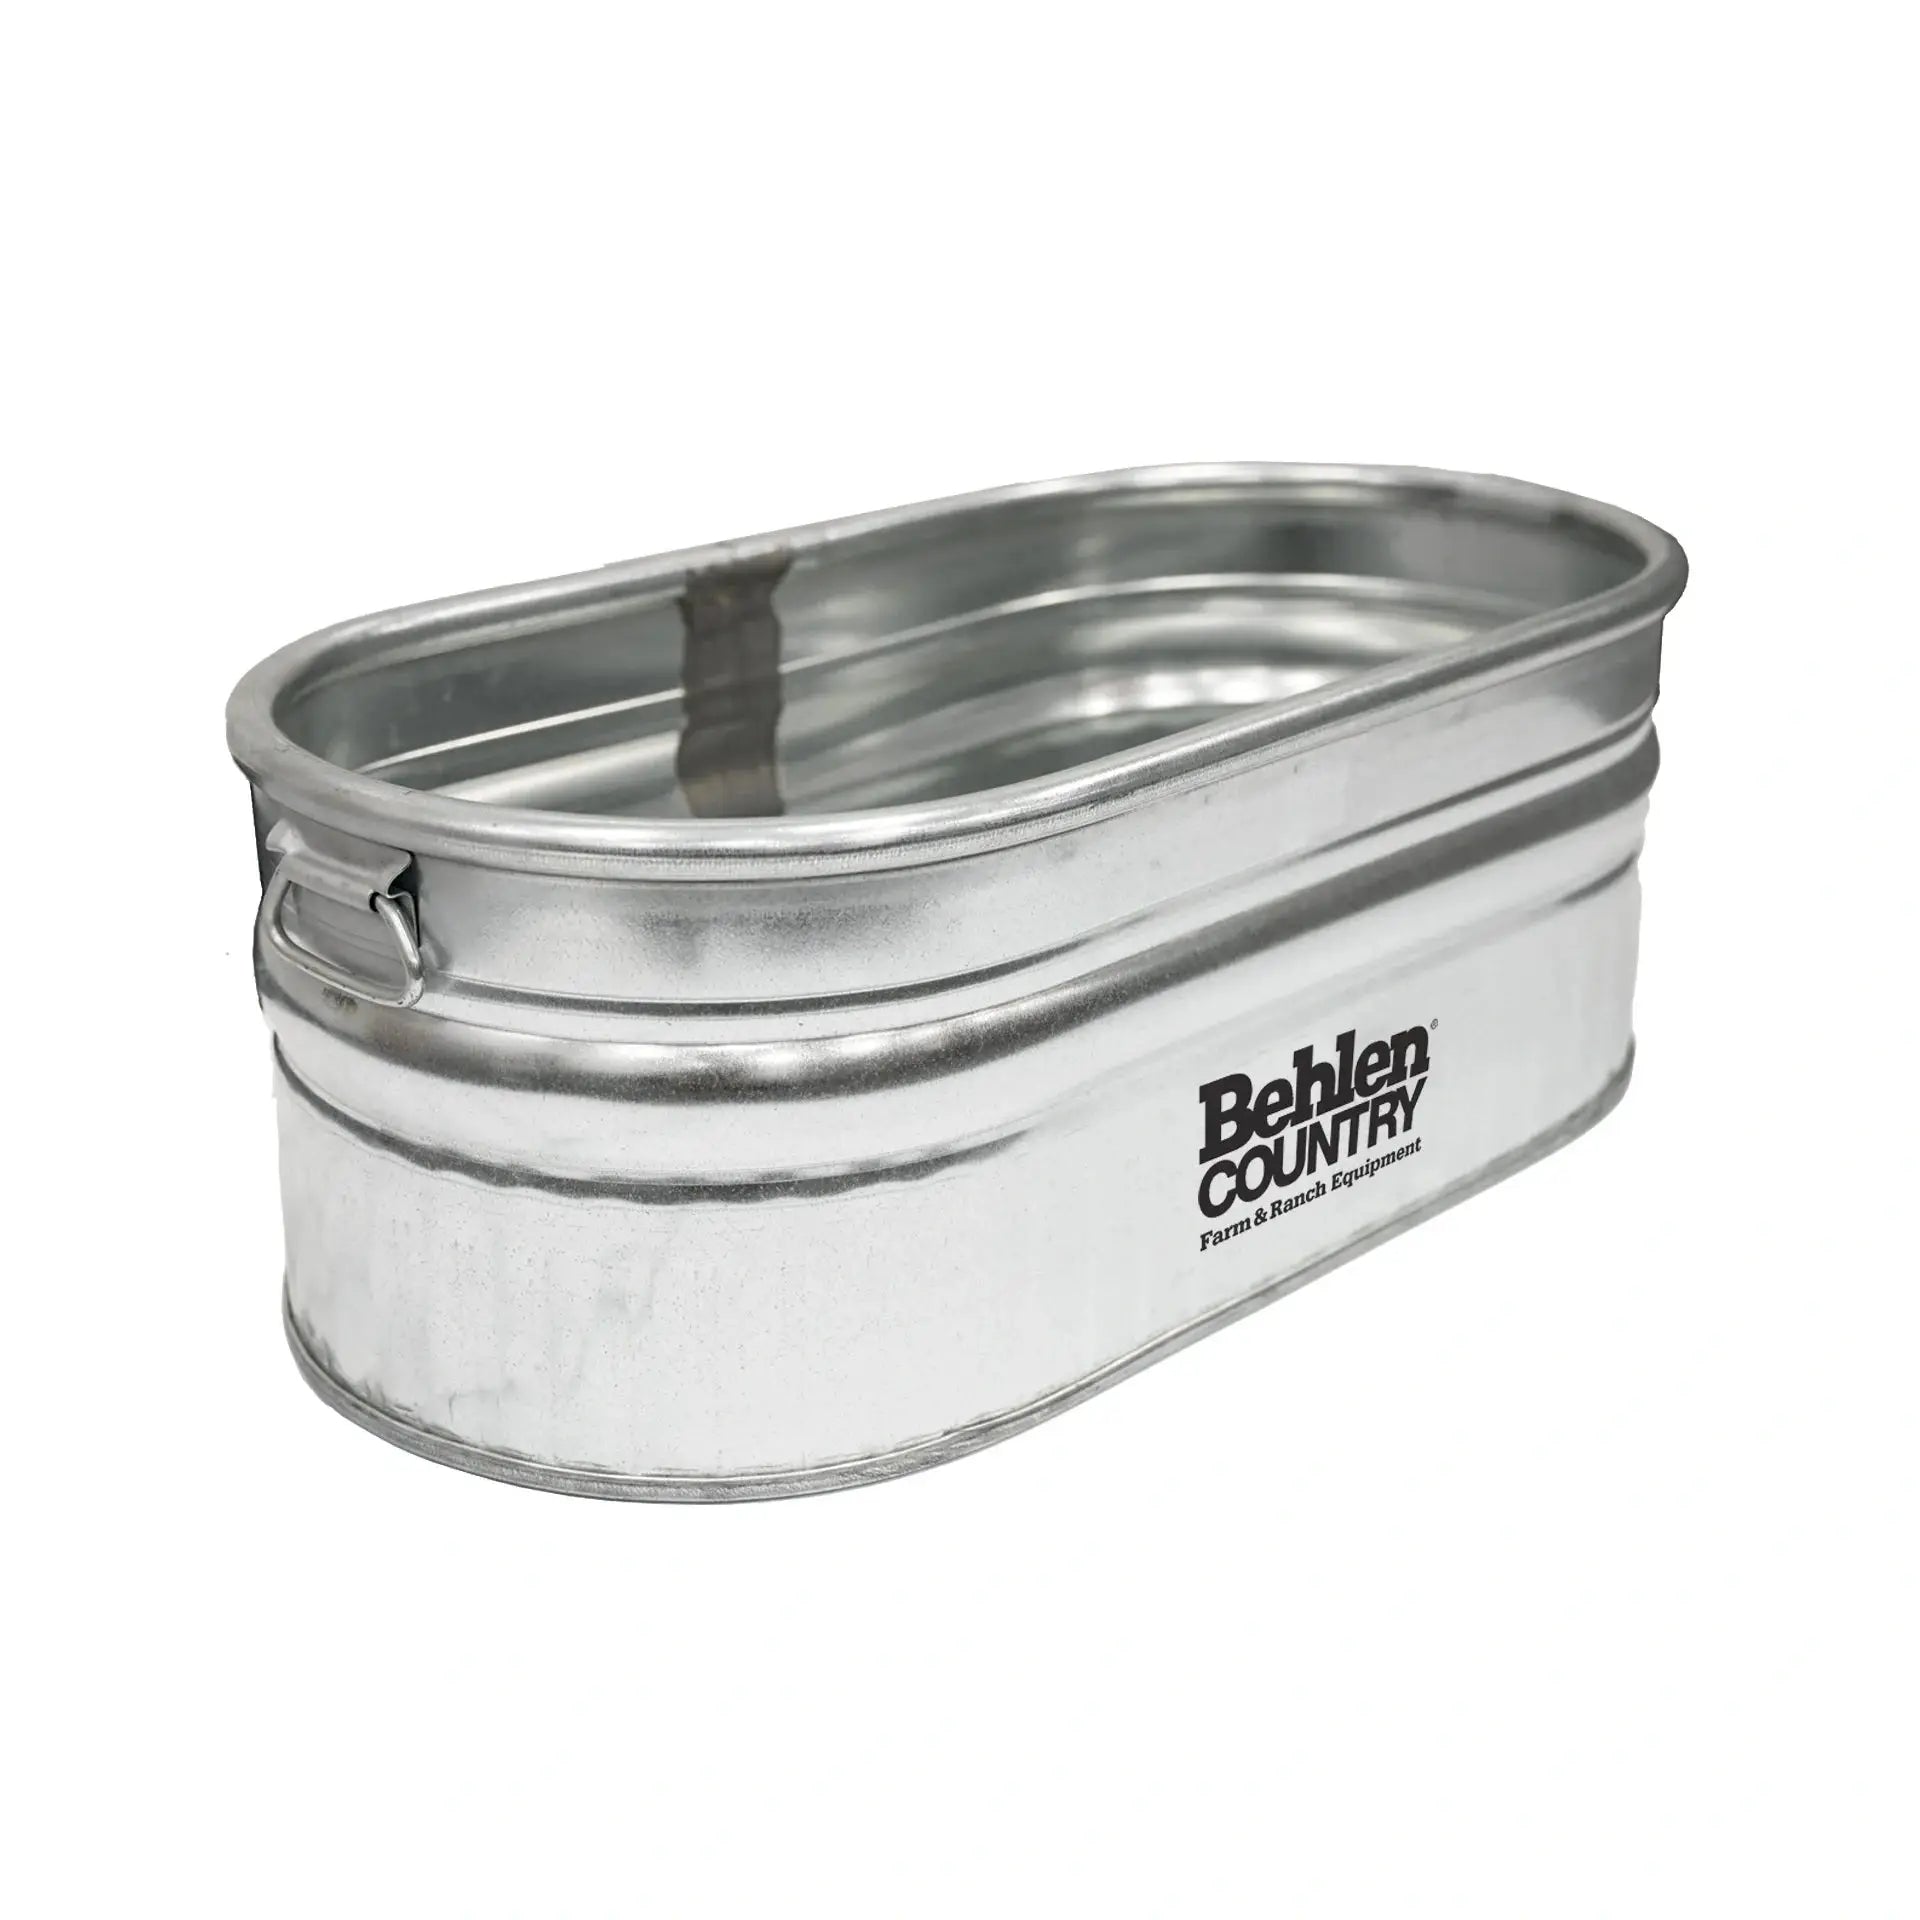 Behlen Country - Shallow Utility Tank with Handles (25 gal)